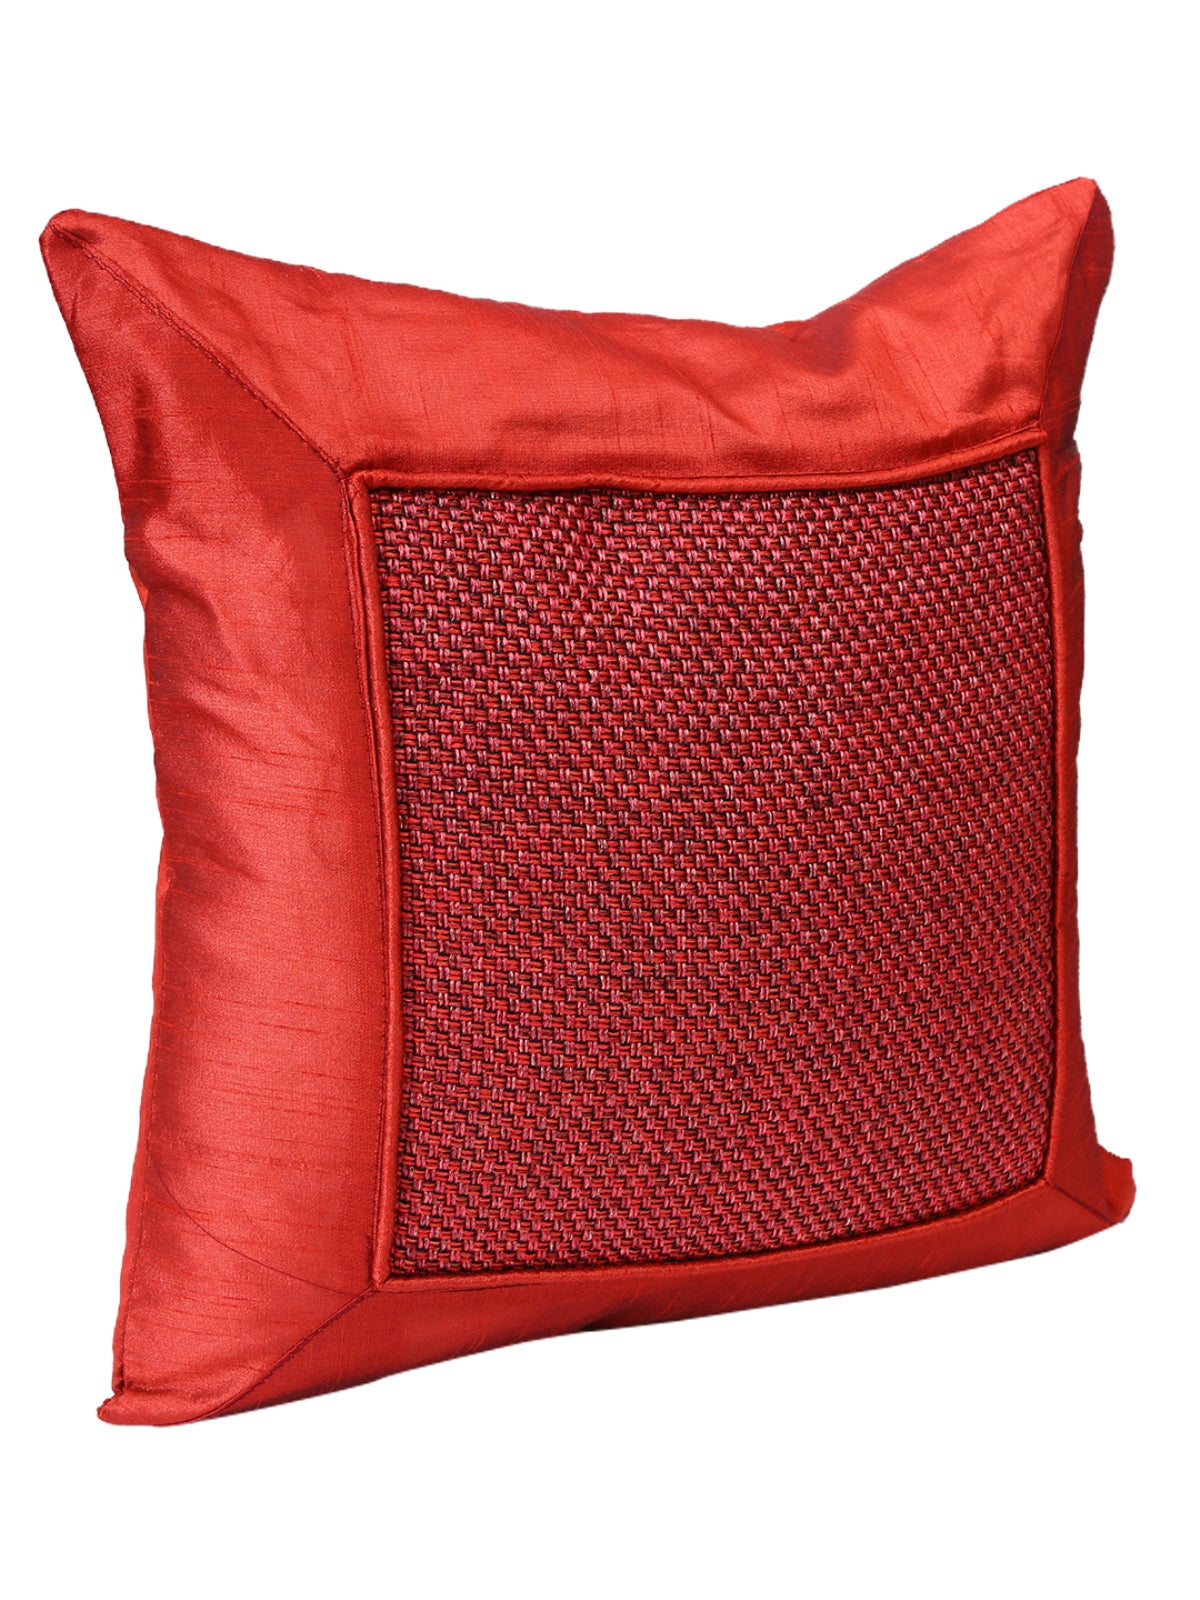 Red Set of 5 Polyester 16 Inch x 16 Inch Cushion Covers